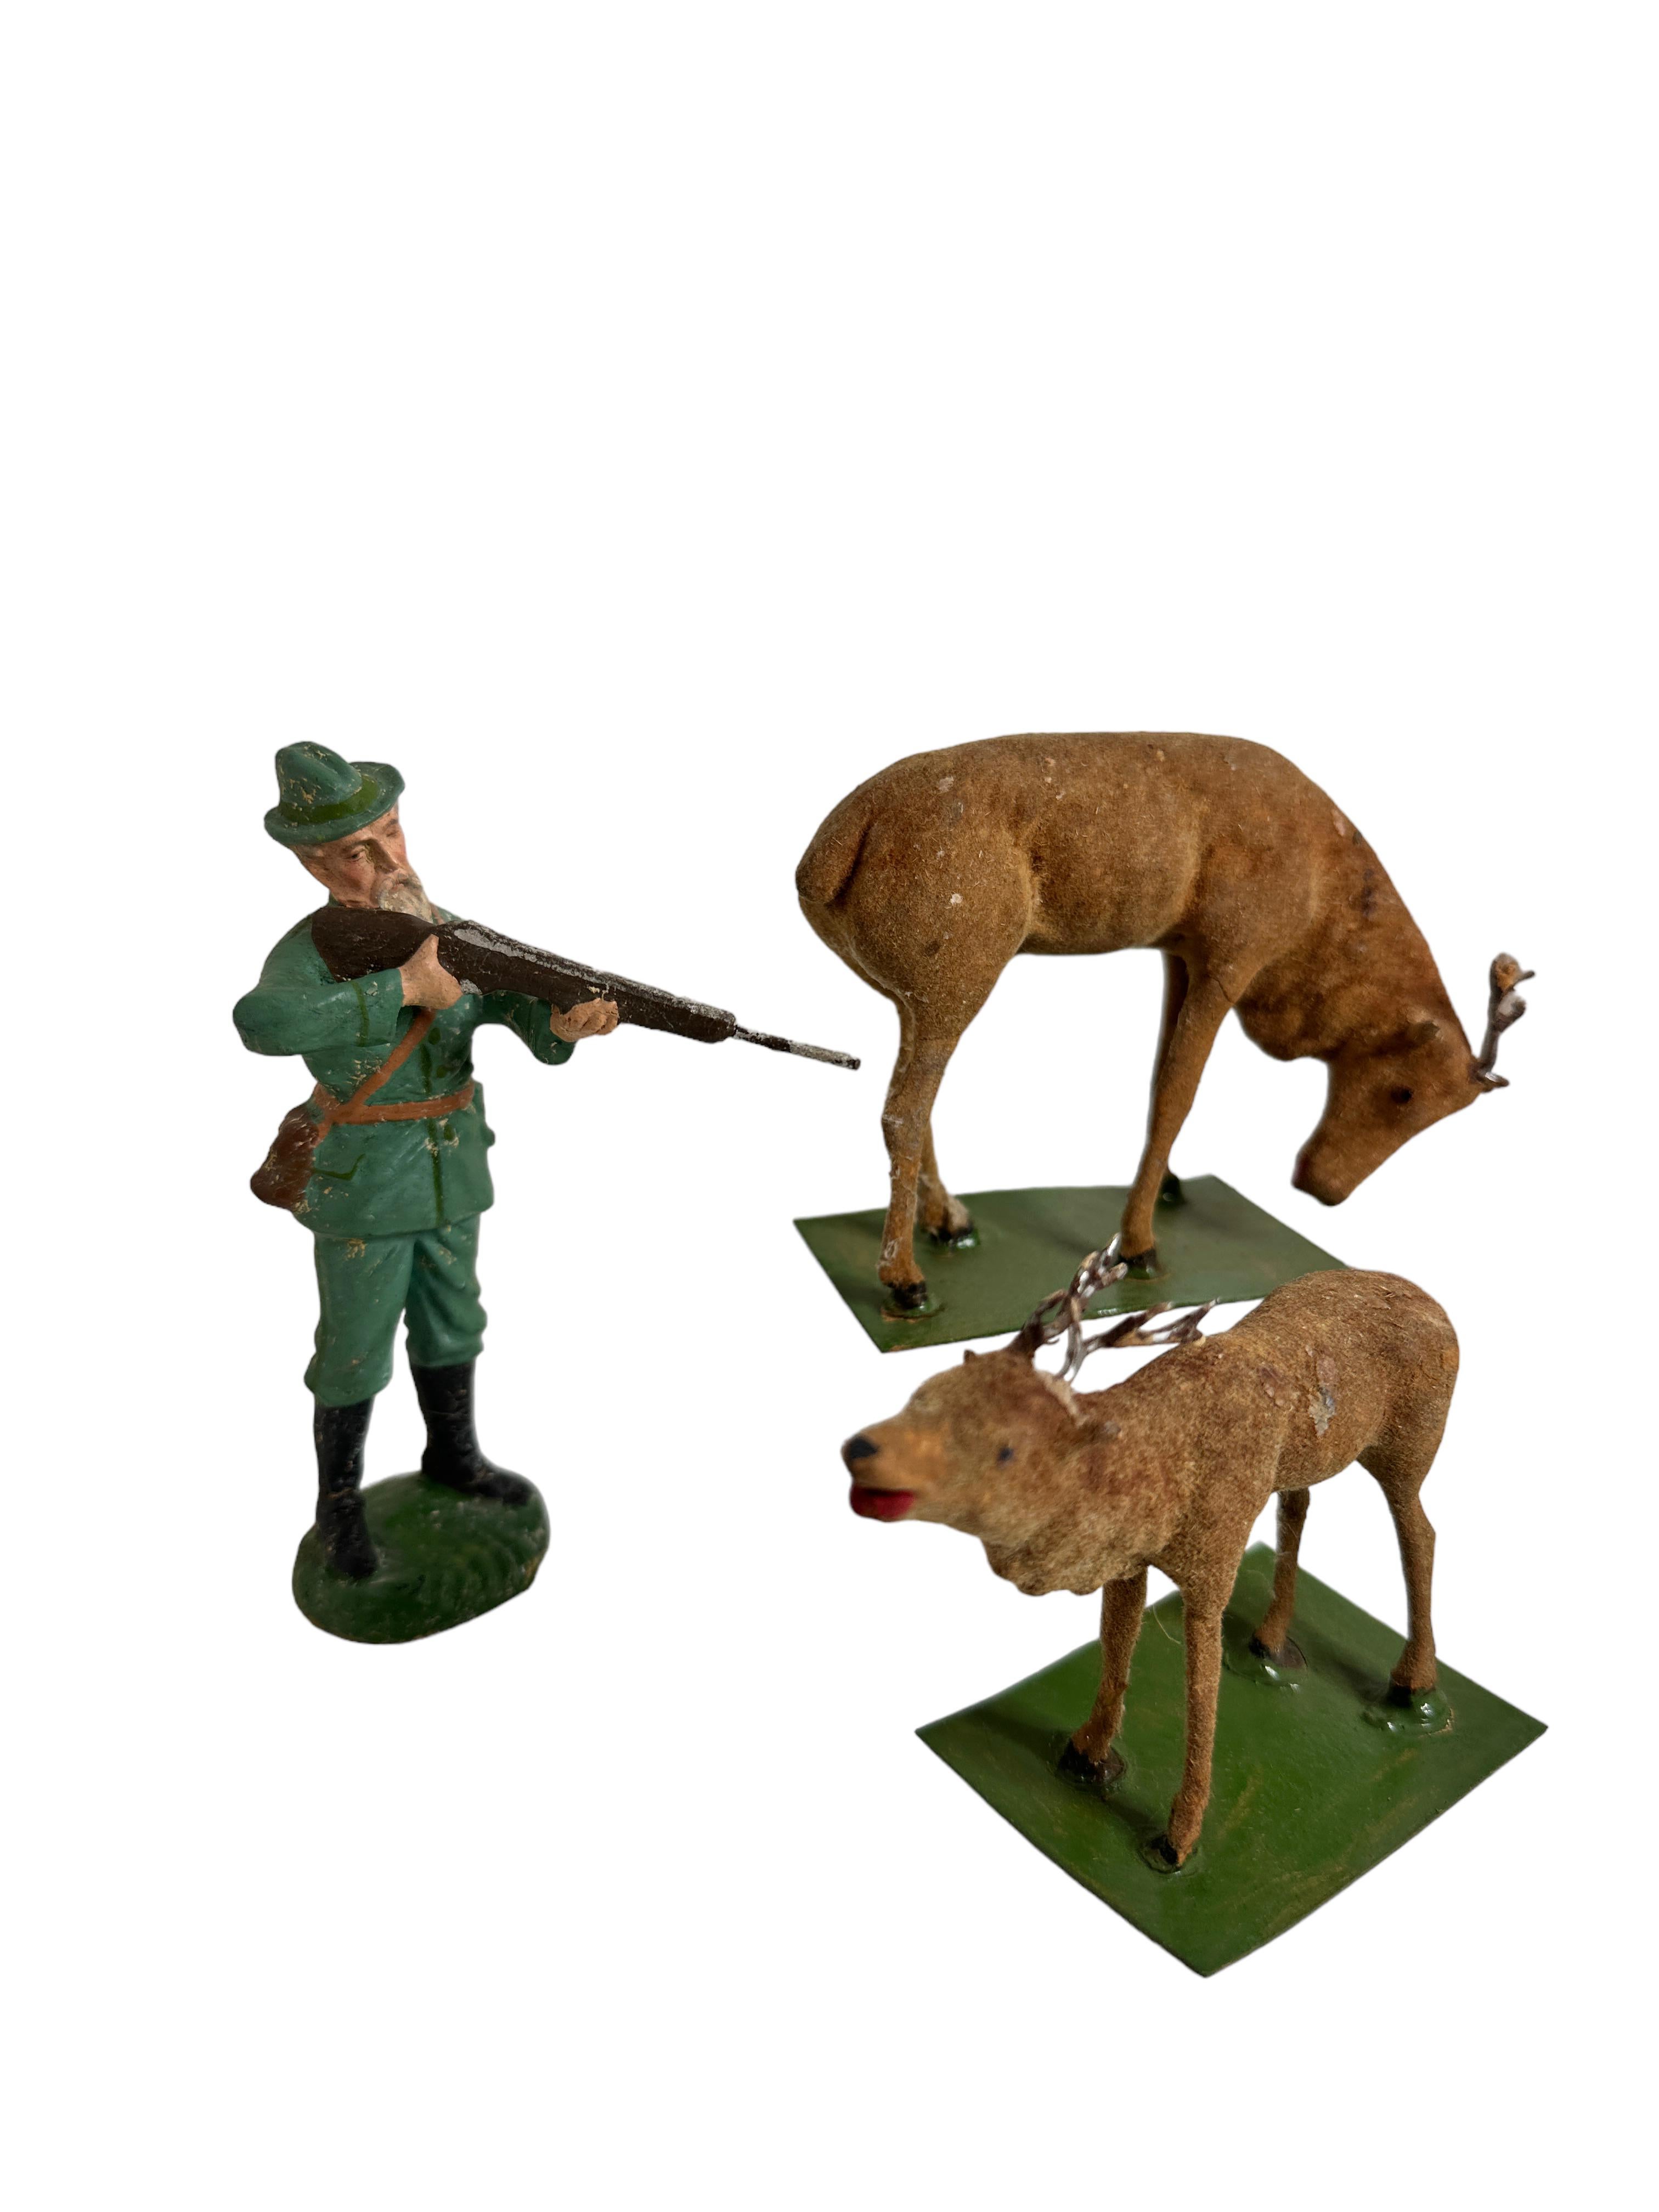 Antique German set of five Putz stick-legged Deers and a Hunter. All of them are genuine antique German Christmas nativity scene figures. As they are all old, most show the expected signs of age and use. This is a fabulous set of stick-legged deers